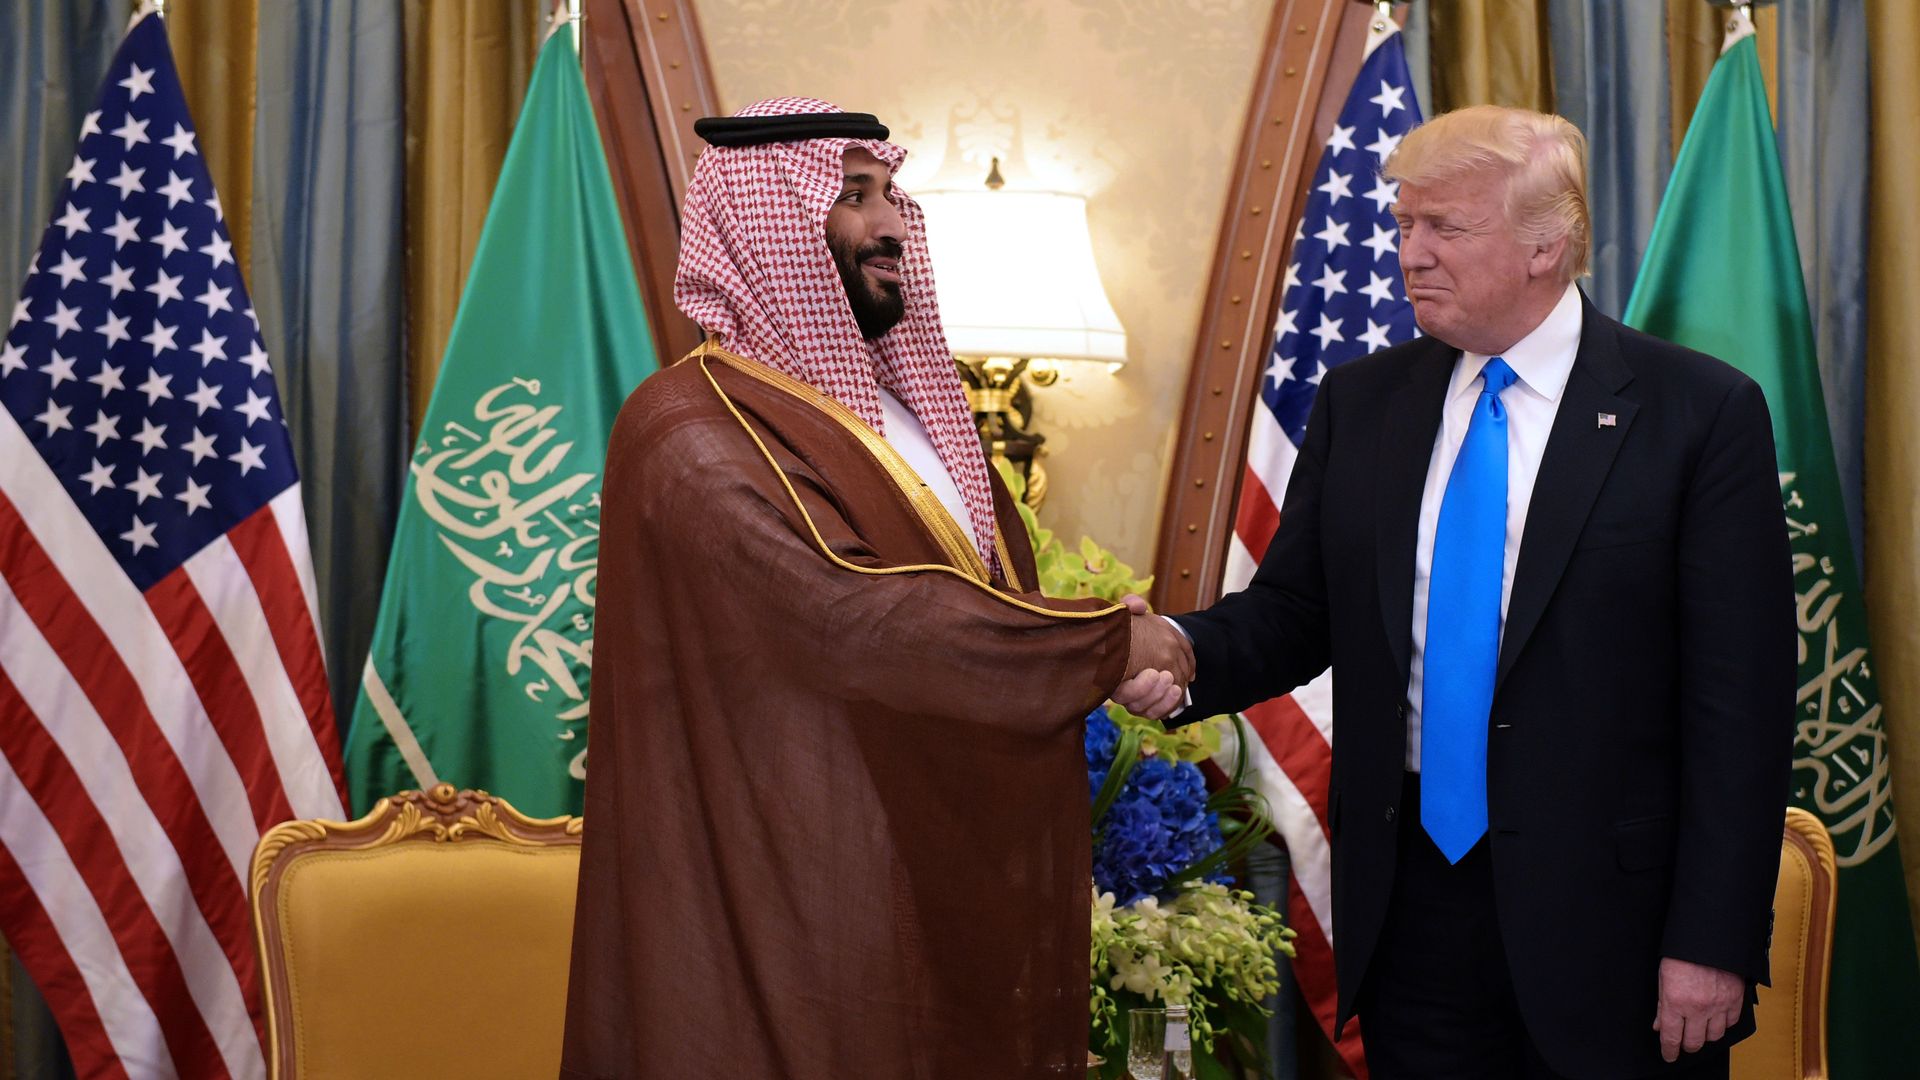 In this image, Trump and the Crown Prince of Saudi Arabia shake hands in an Oval Office meeting. 